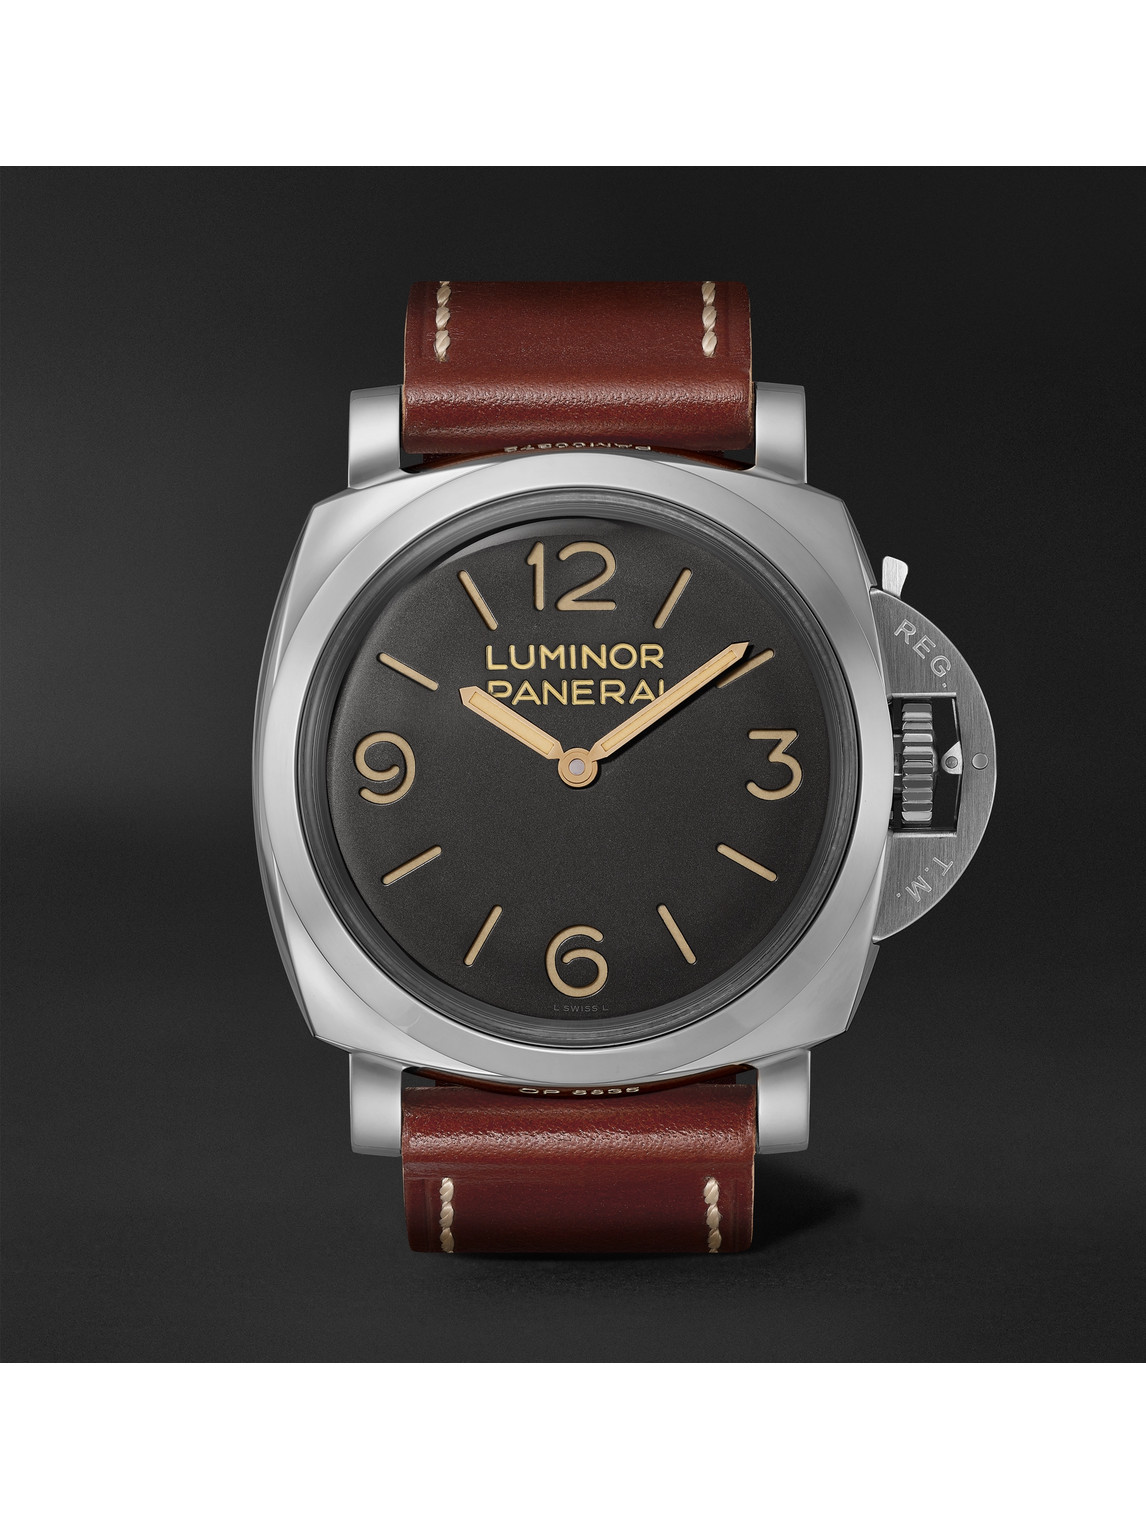 Panerai Luminor 1950 Hand-wound 47mm Stainless Steel And Leather Watch, Ref. No. Pam00372 In Black